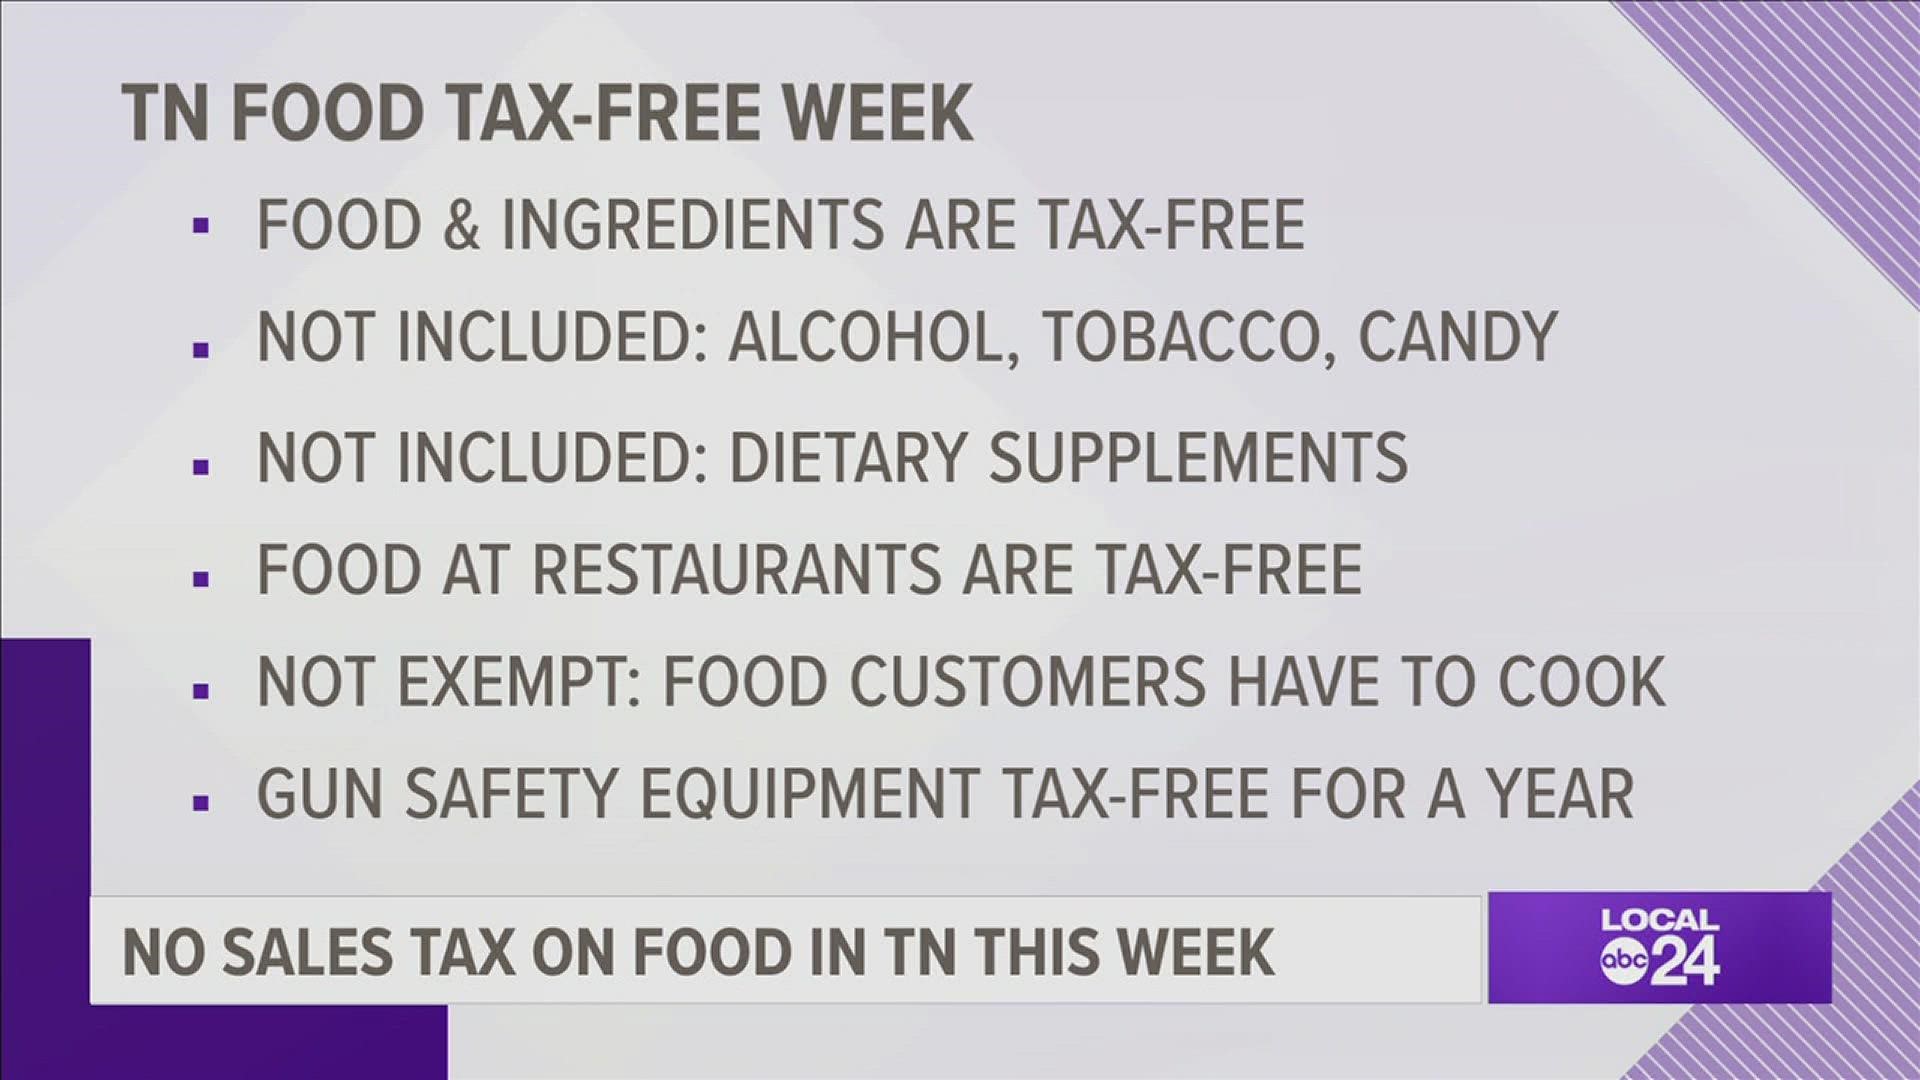 This week until Thursday, you can get groceries without tax.